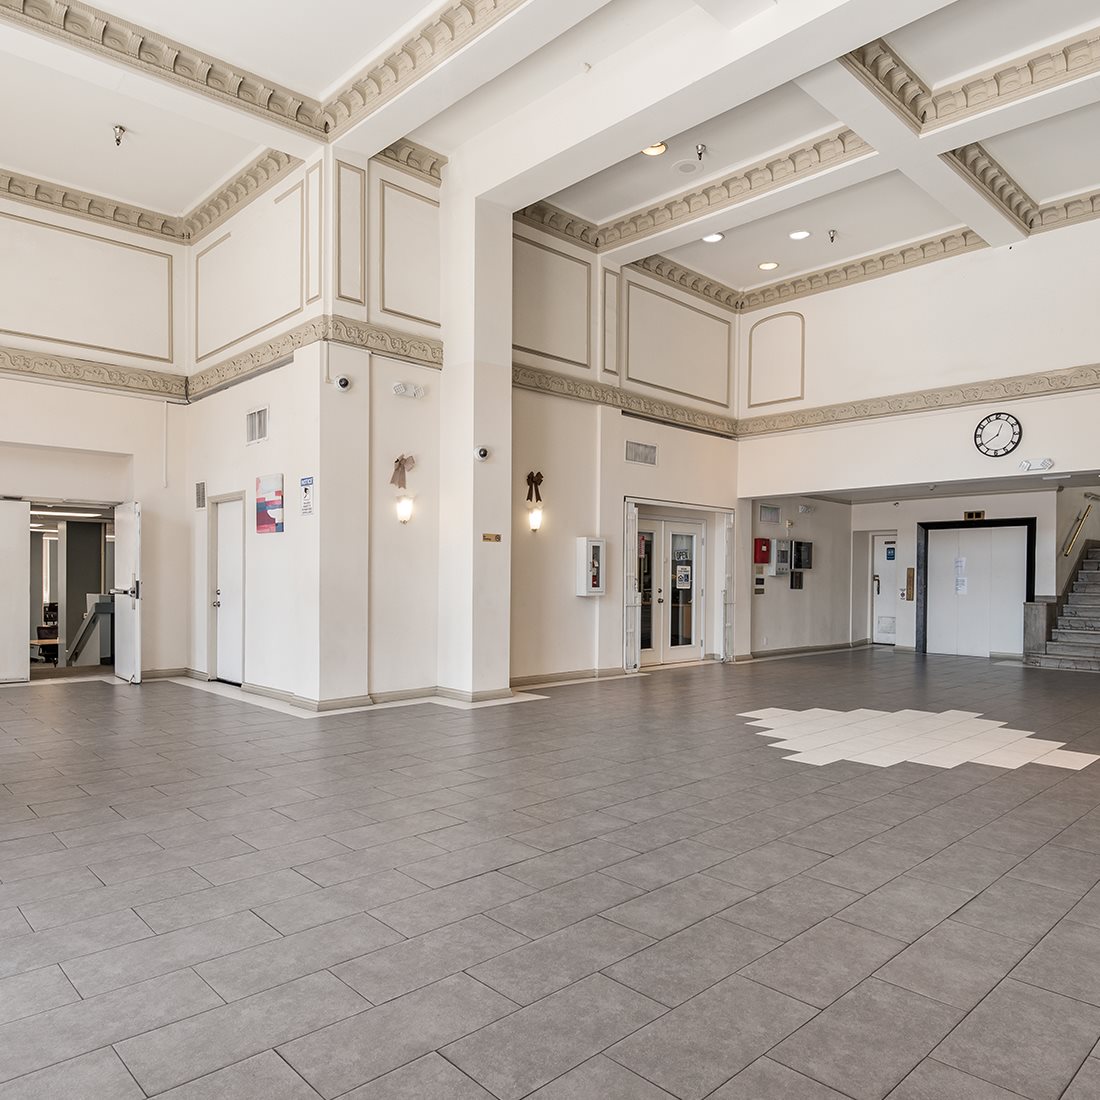 Spacious lobby area with an elevator and a staircase. This area has high ceilings, and security cameras.